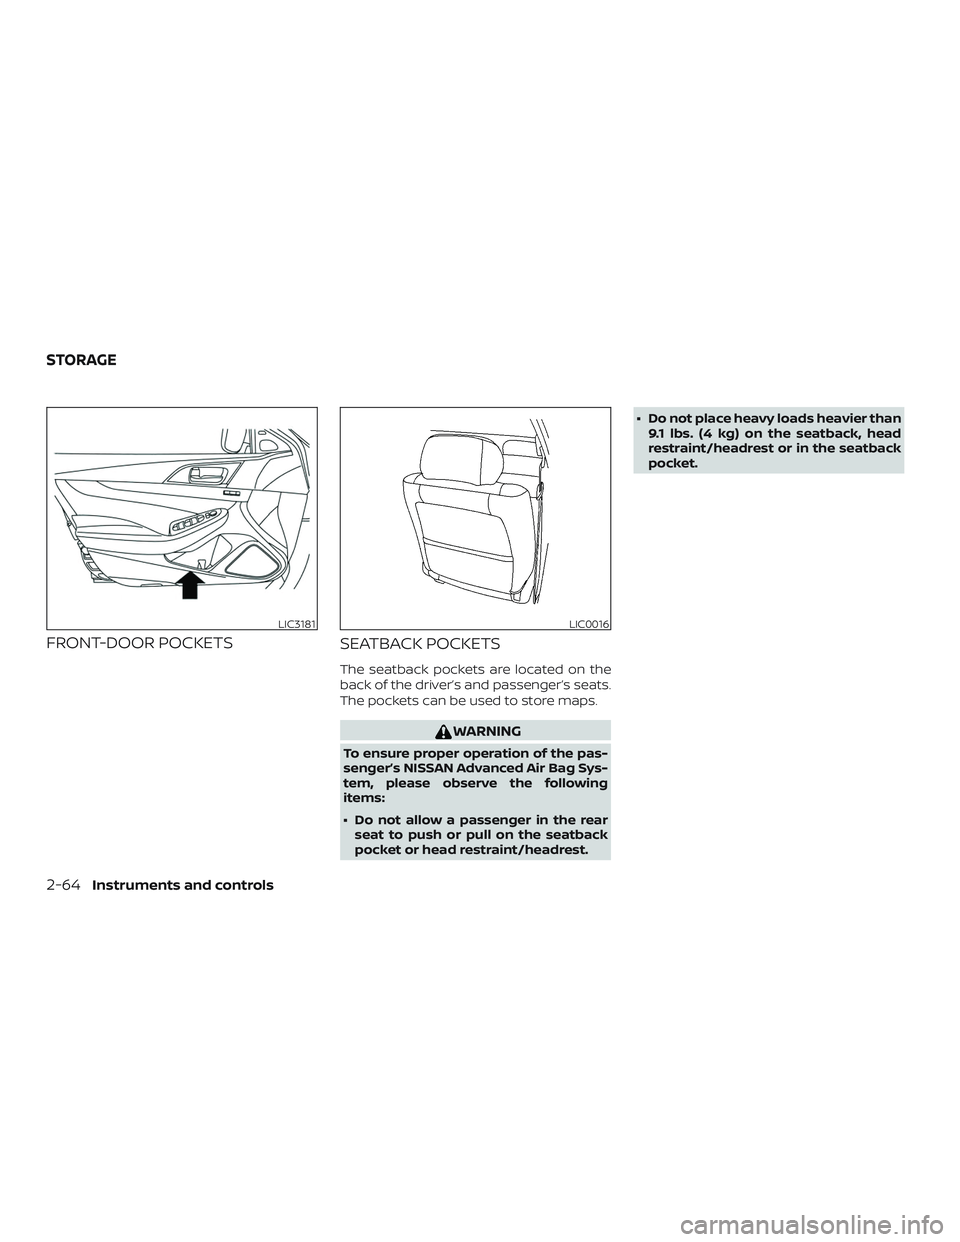 NISSAN MAXIMA 2020  Owner´s Manual FRONT-DOOR POCKETSSEATBACK POCKETS
The seatback pockets are located on the
back of the driver’s and passenger’s seats.
The pockets can be used to store maps.
WARNING
To ensure proper operation of 